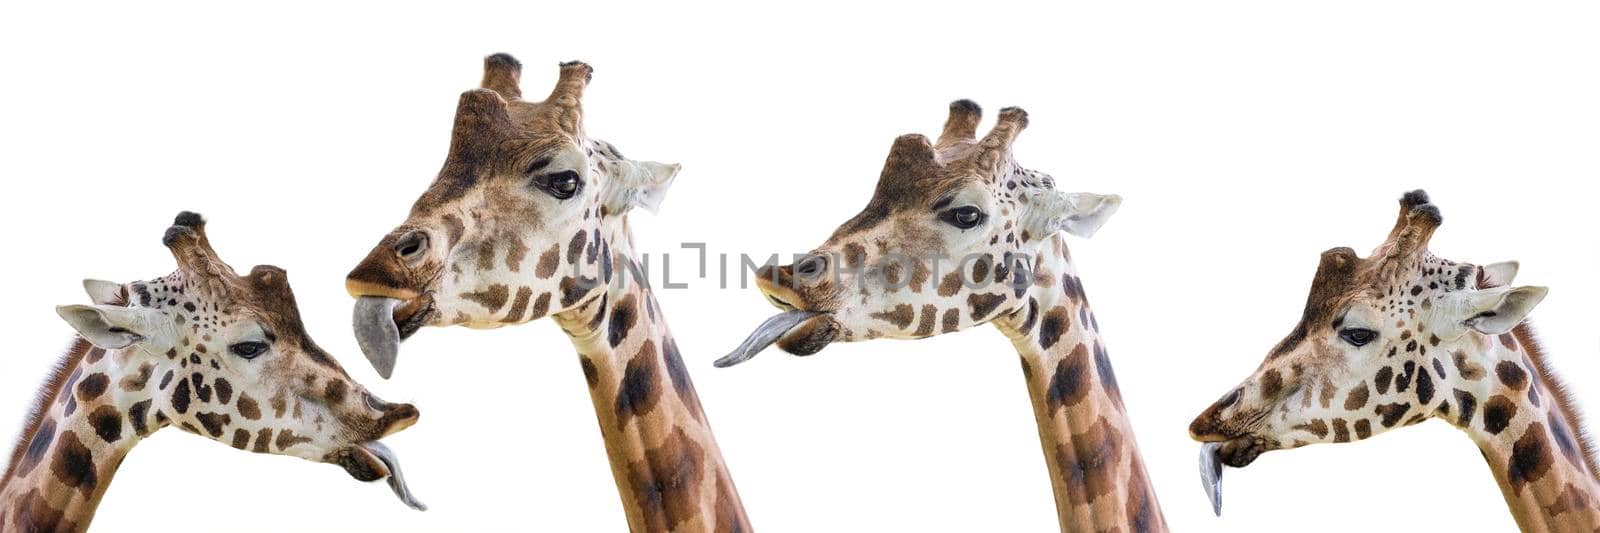 Giraffe shows a long tongue. Funny giraffe isolated on white background. Close-up of a giraffe's head with its tongue hanging out